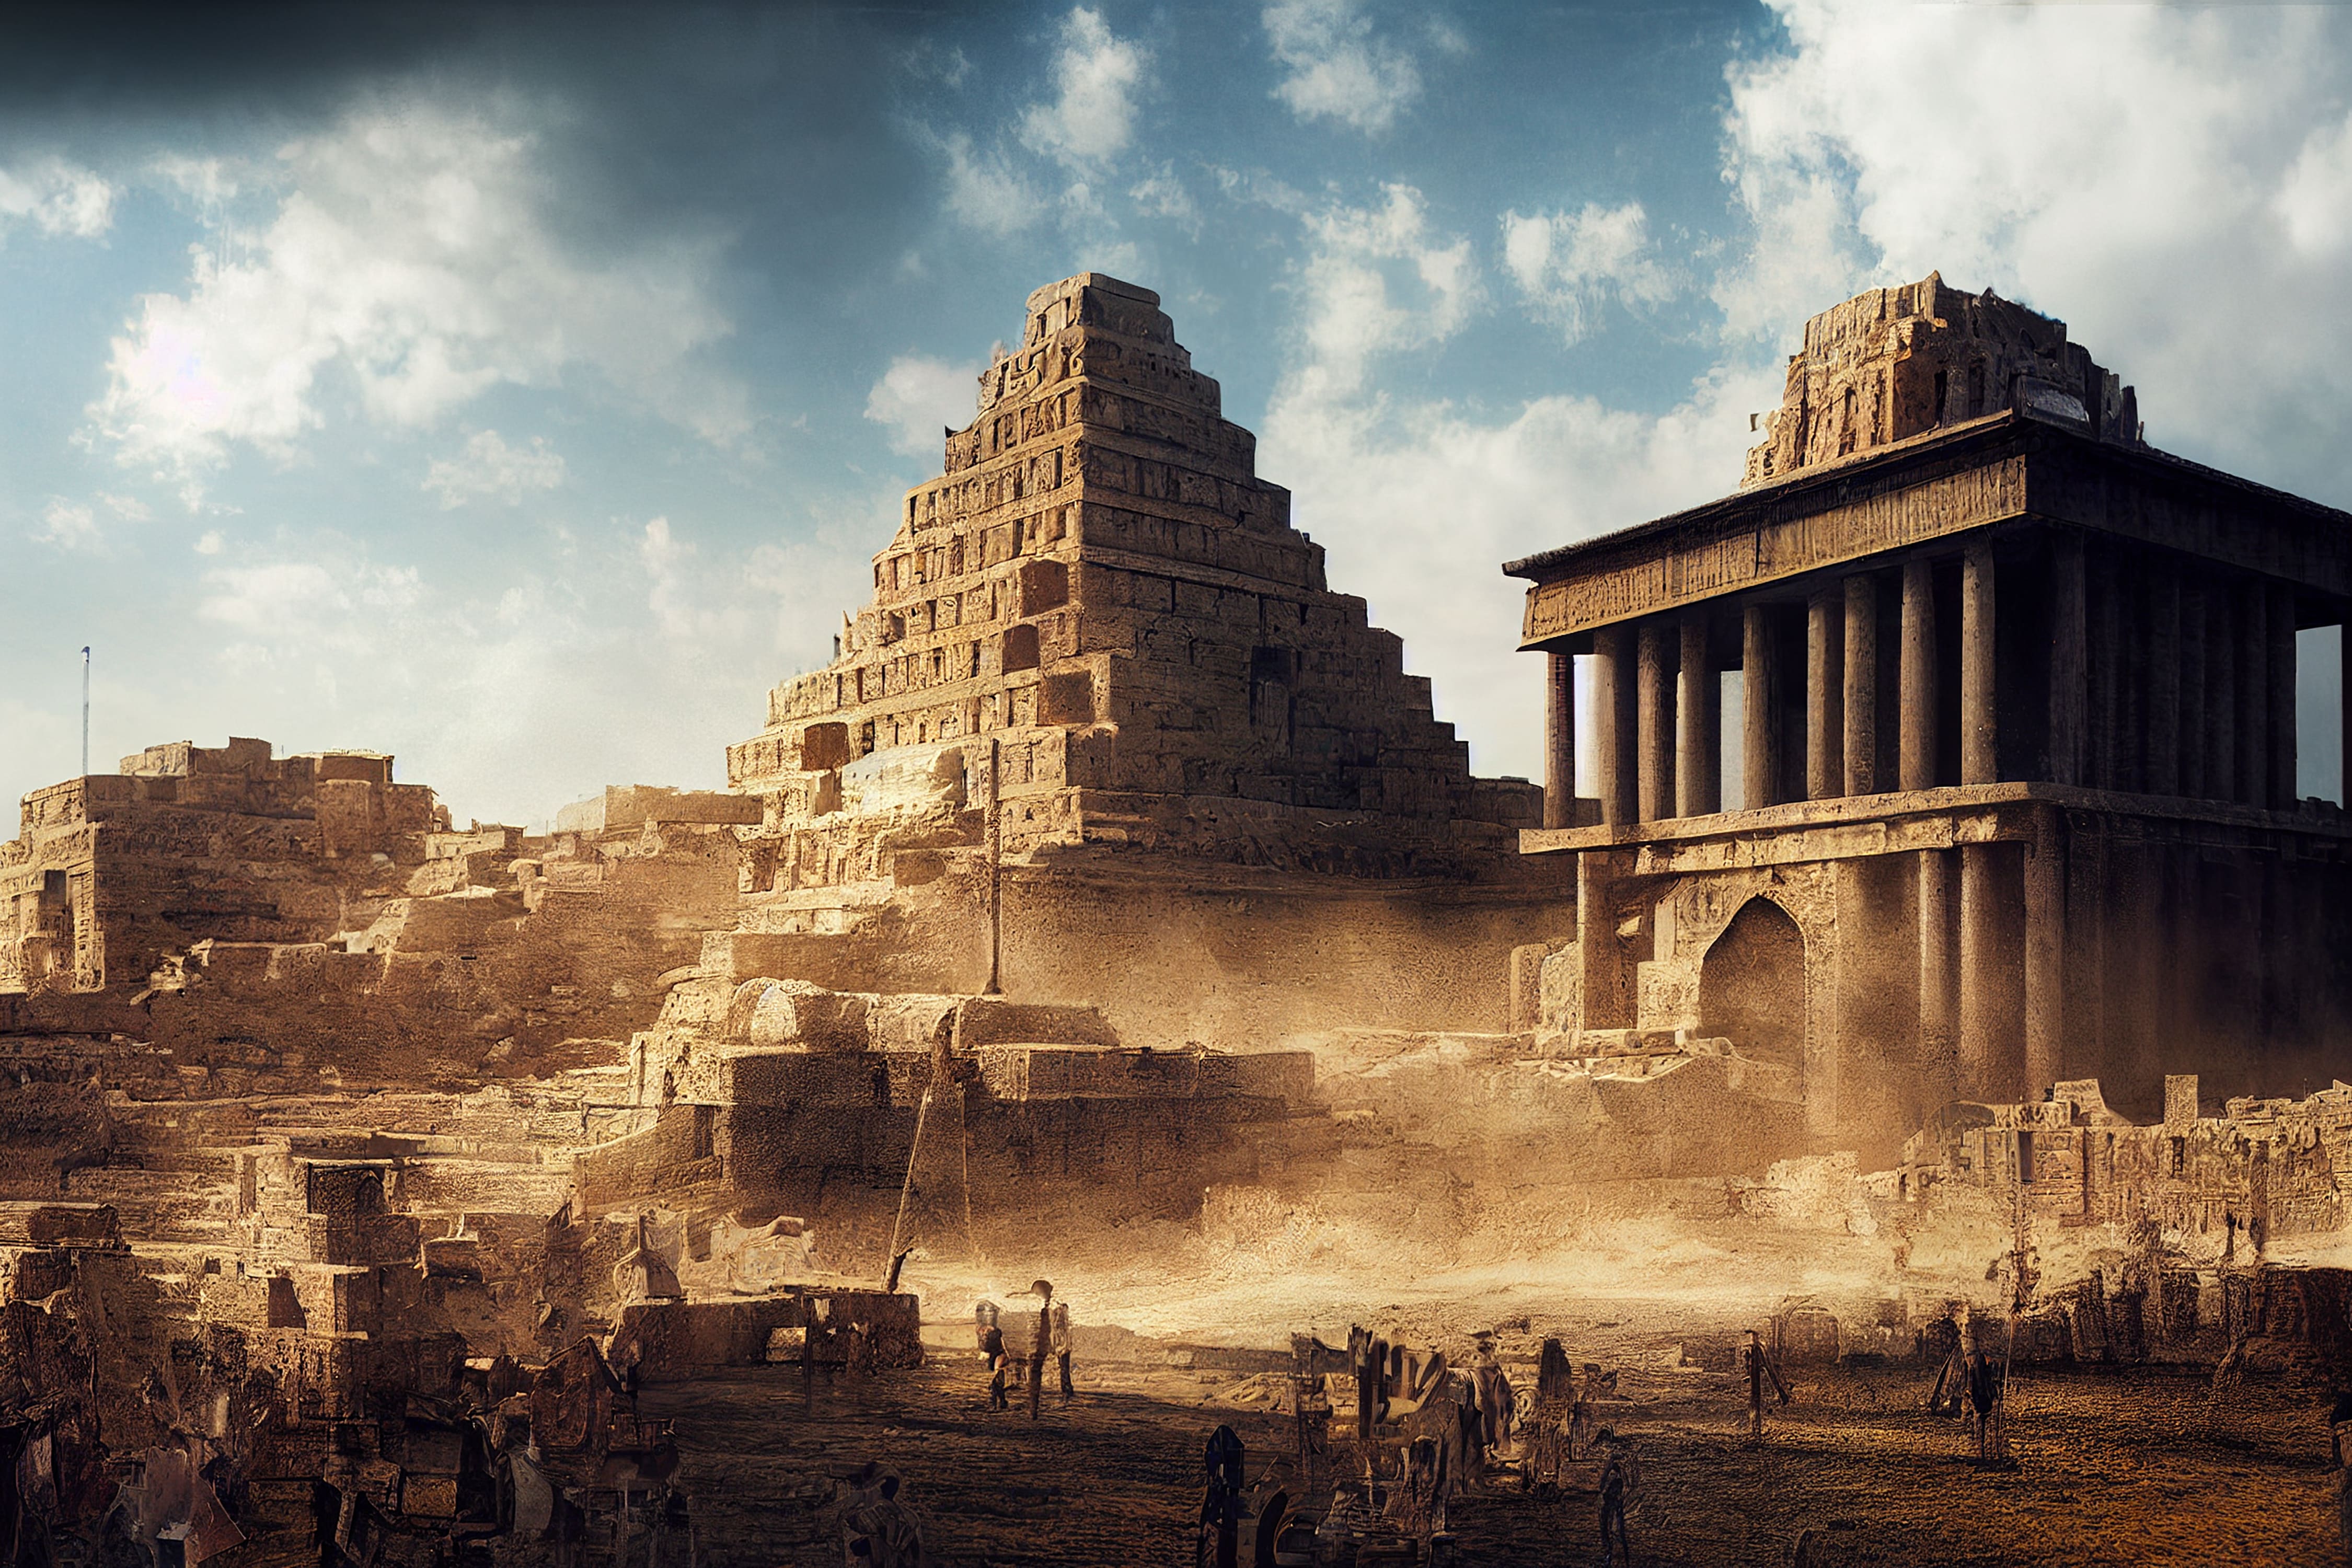 Depiction of ancient Babylonian architecture, including a pyramid and temple.